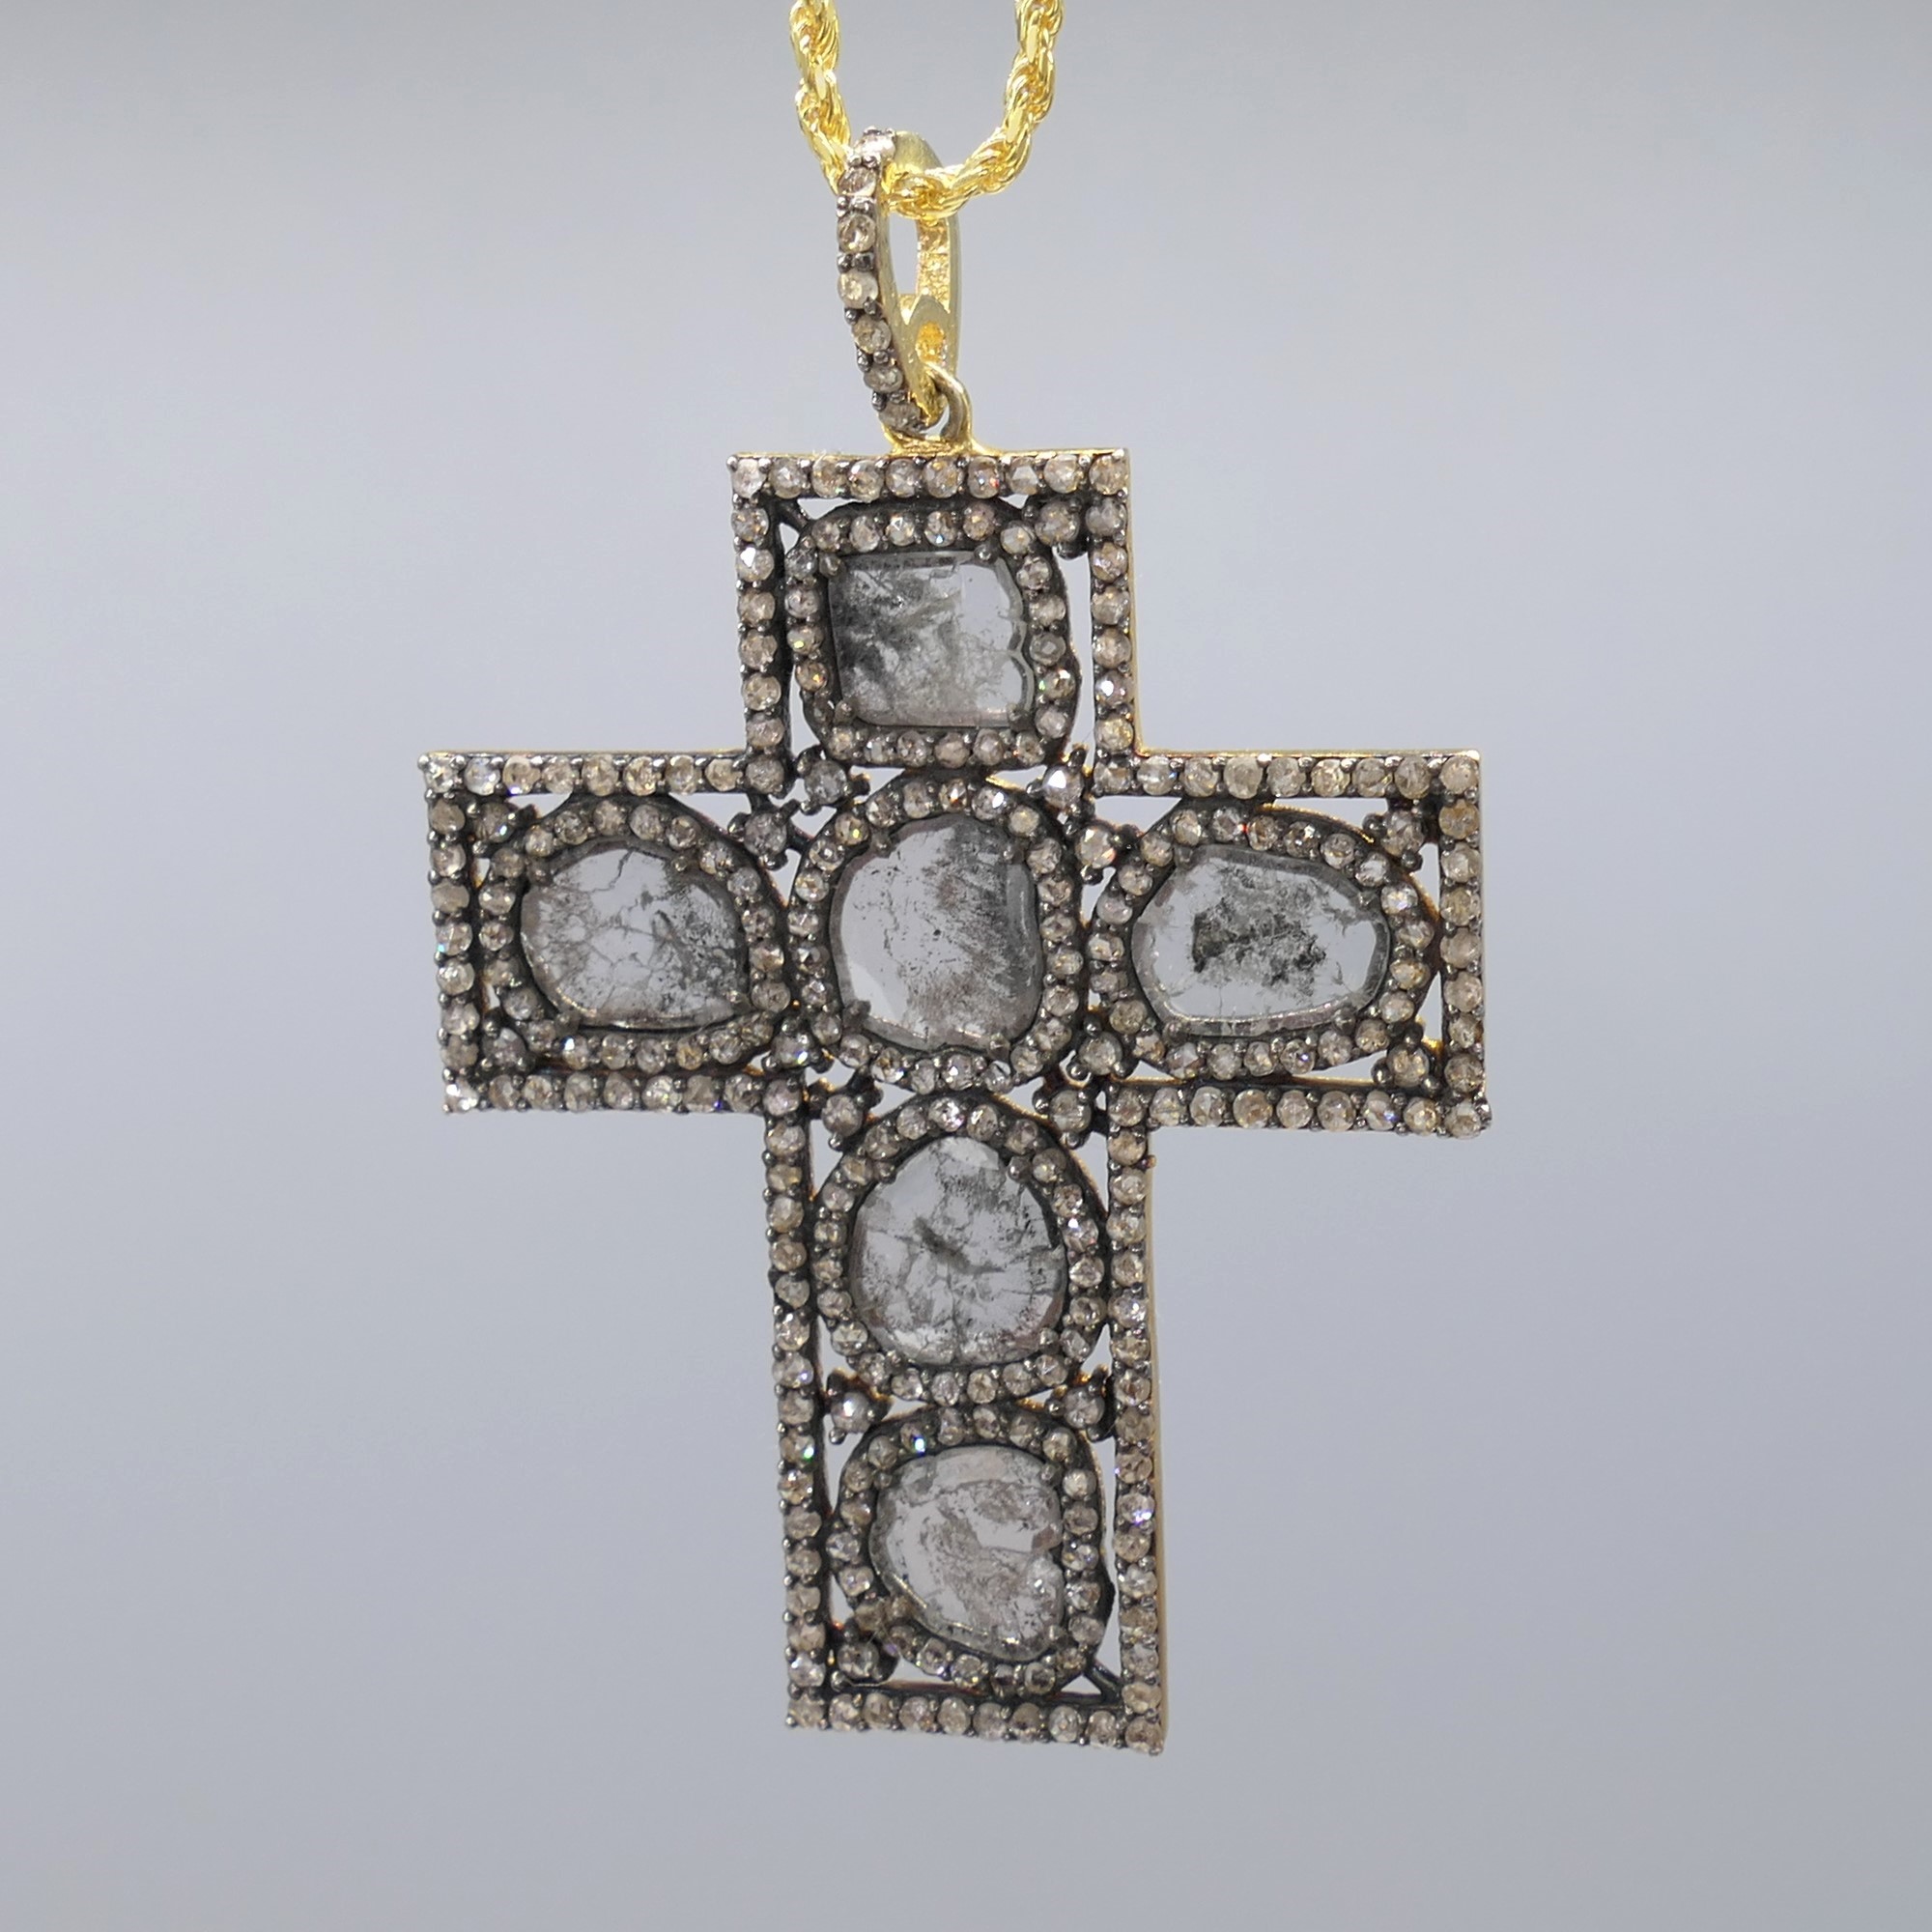 One-Off 3.80 Carat Large Diamond Cross Necklace With Chain - Image 3 of 6